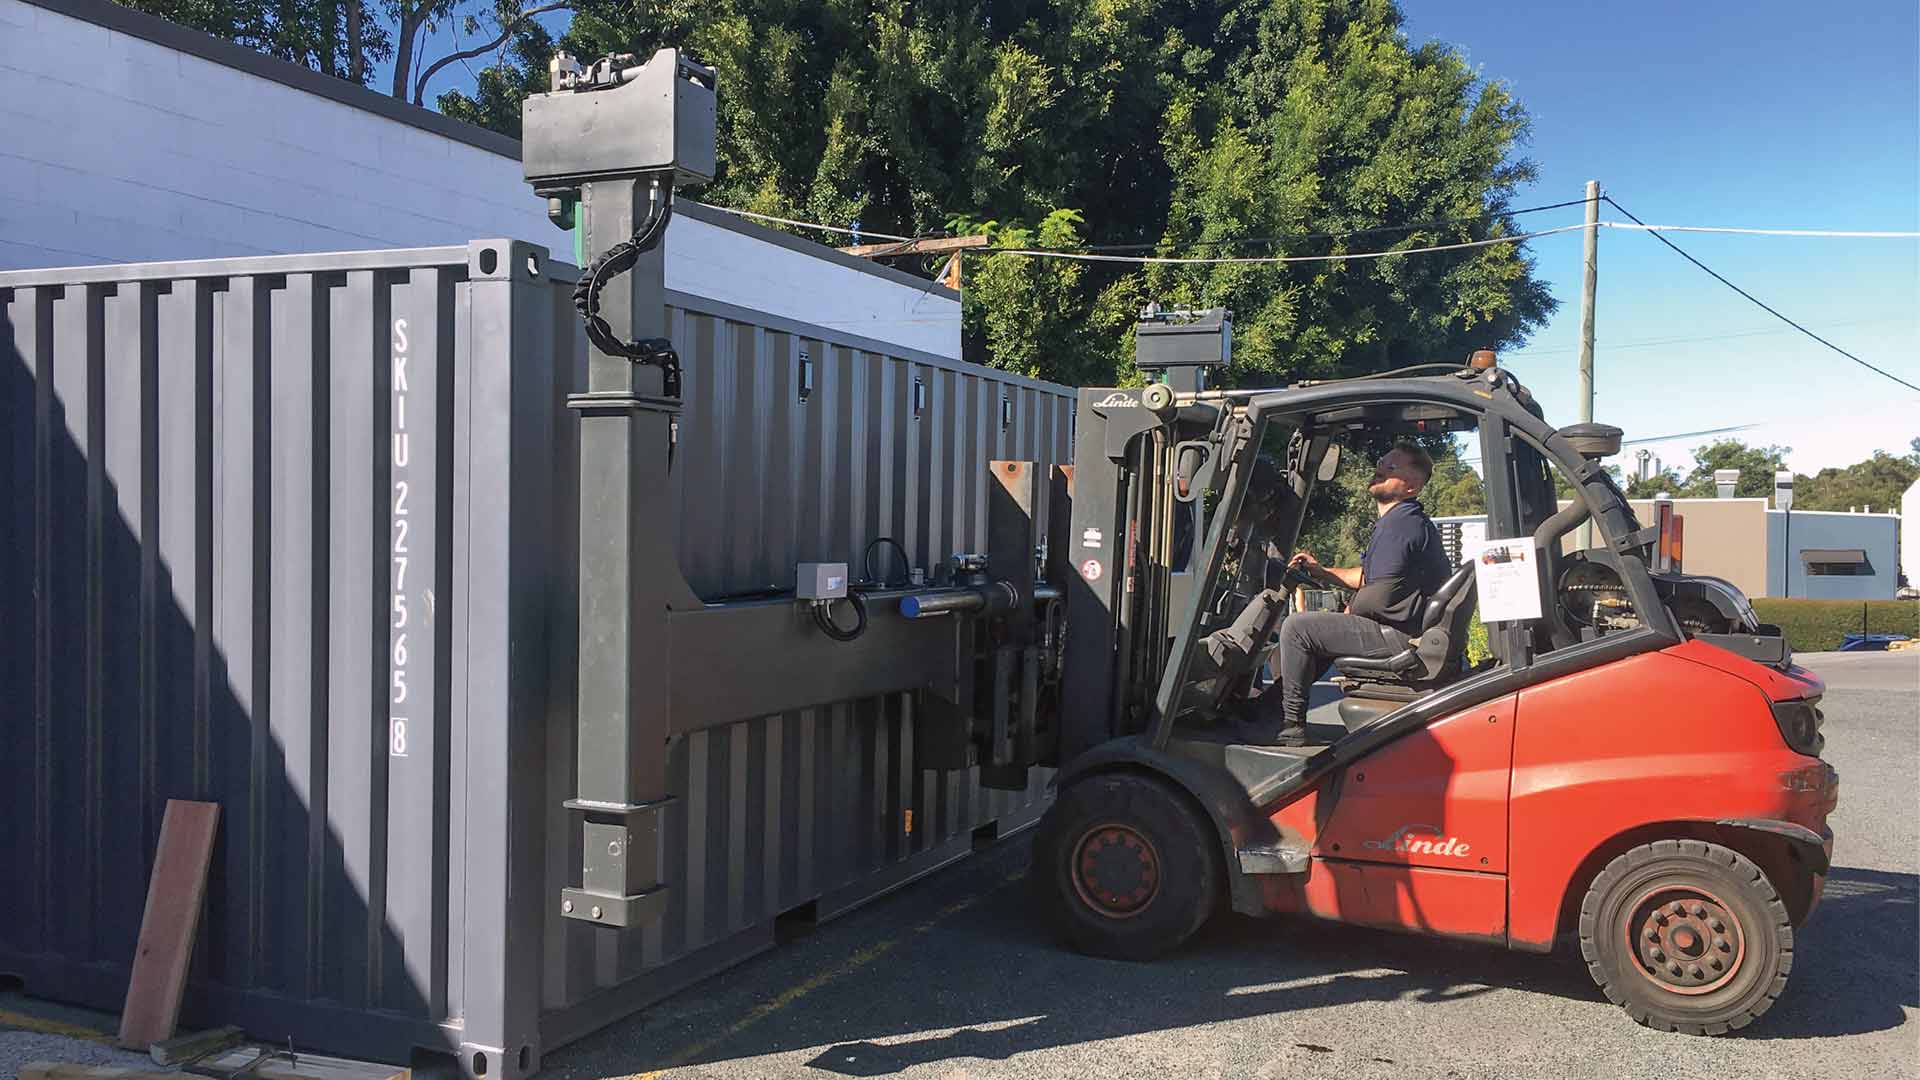 A red forklift truck equipped with a wide attachment picks up an empty container